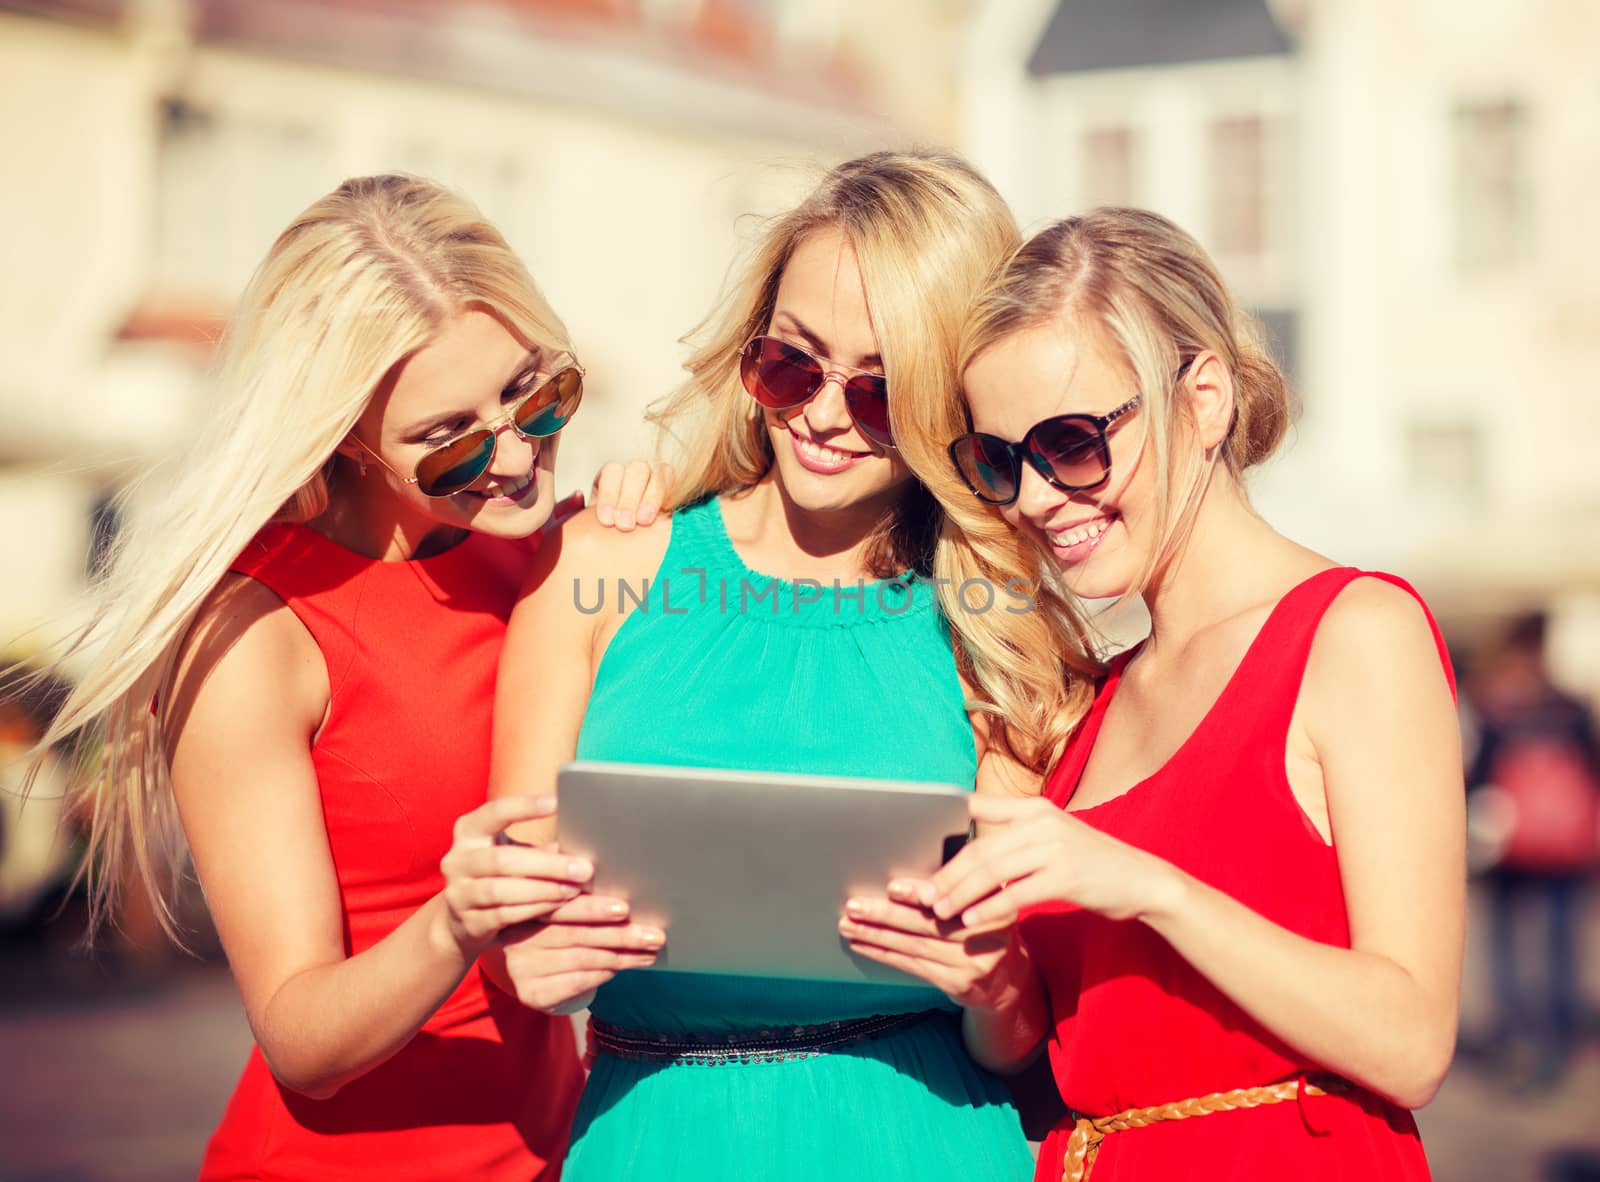 holidays and tourism concept - beautiful blonde girls toursits looking into tablet pc in the city